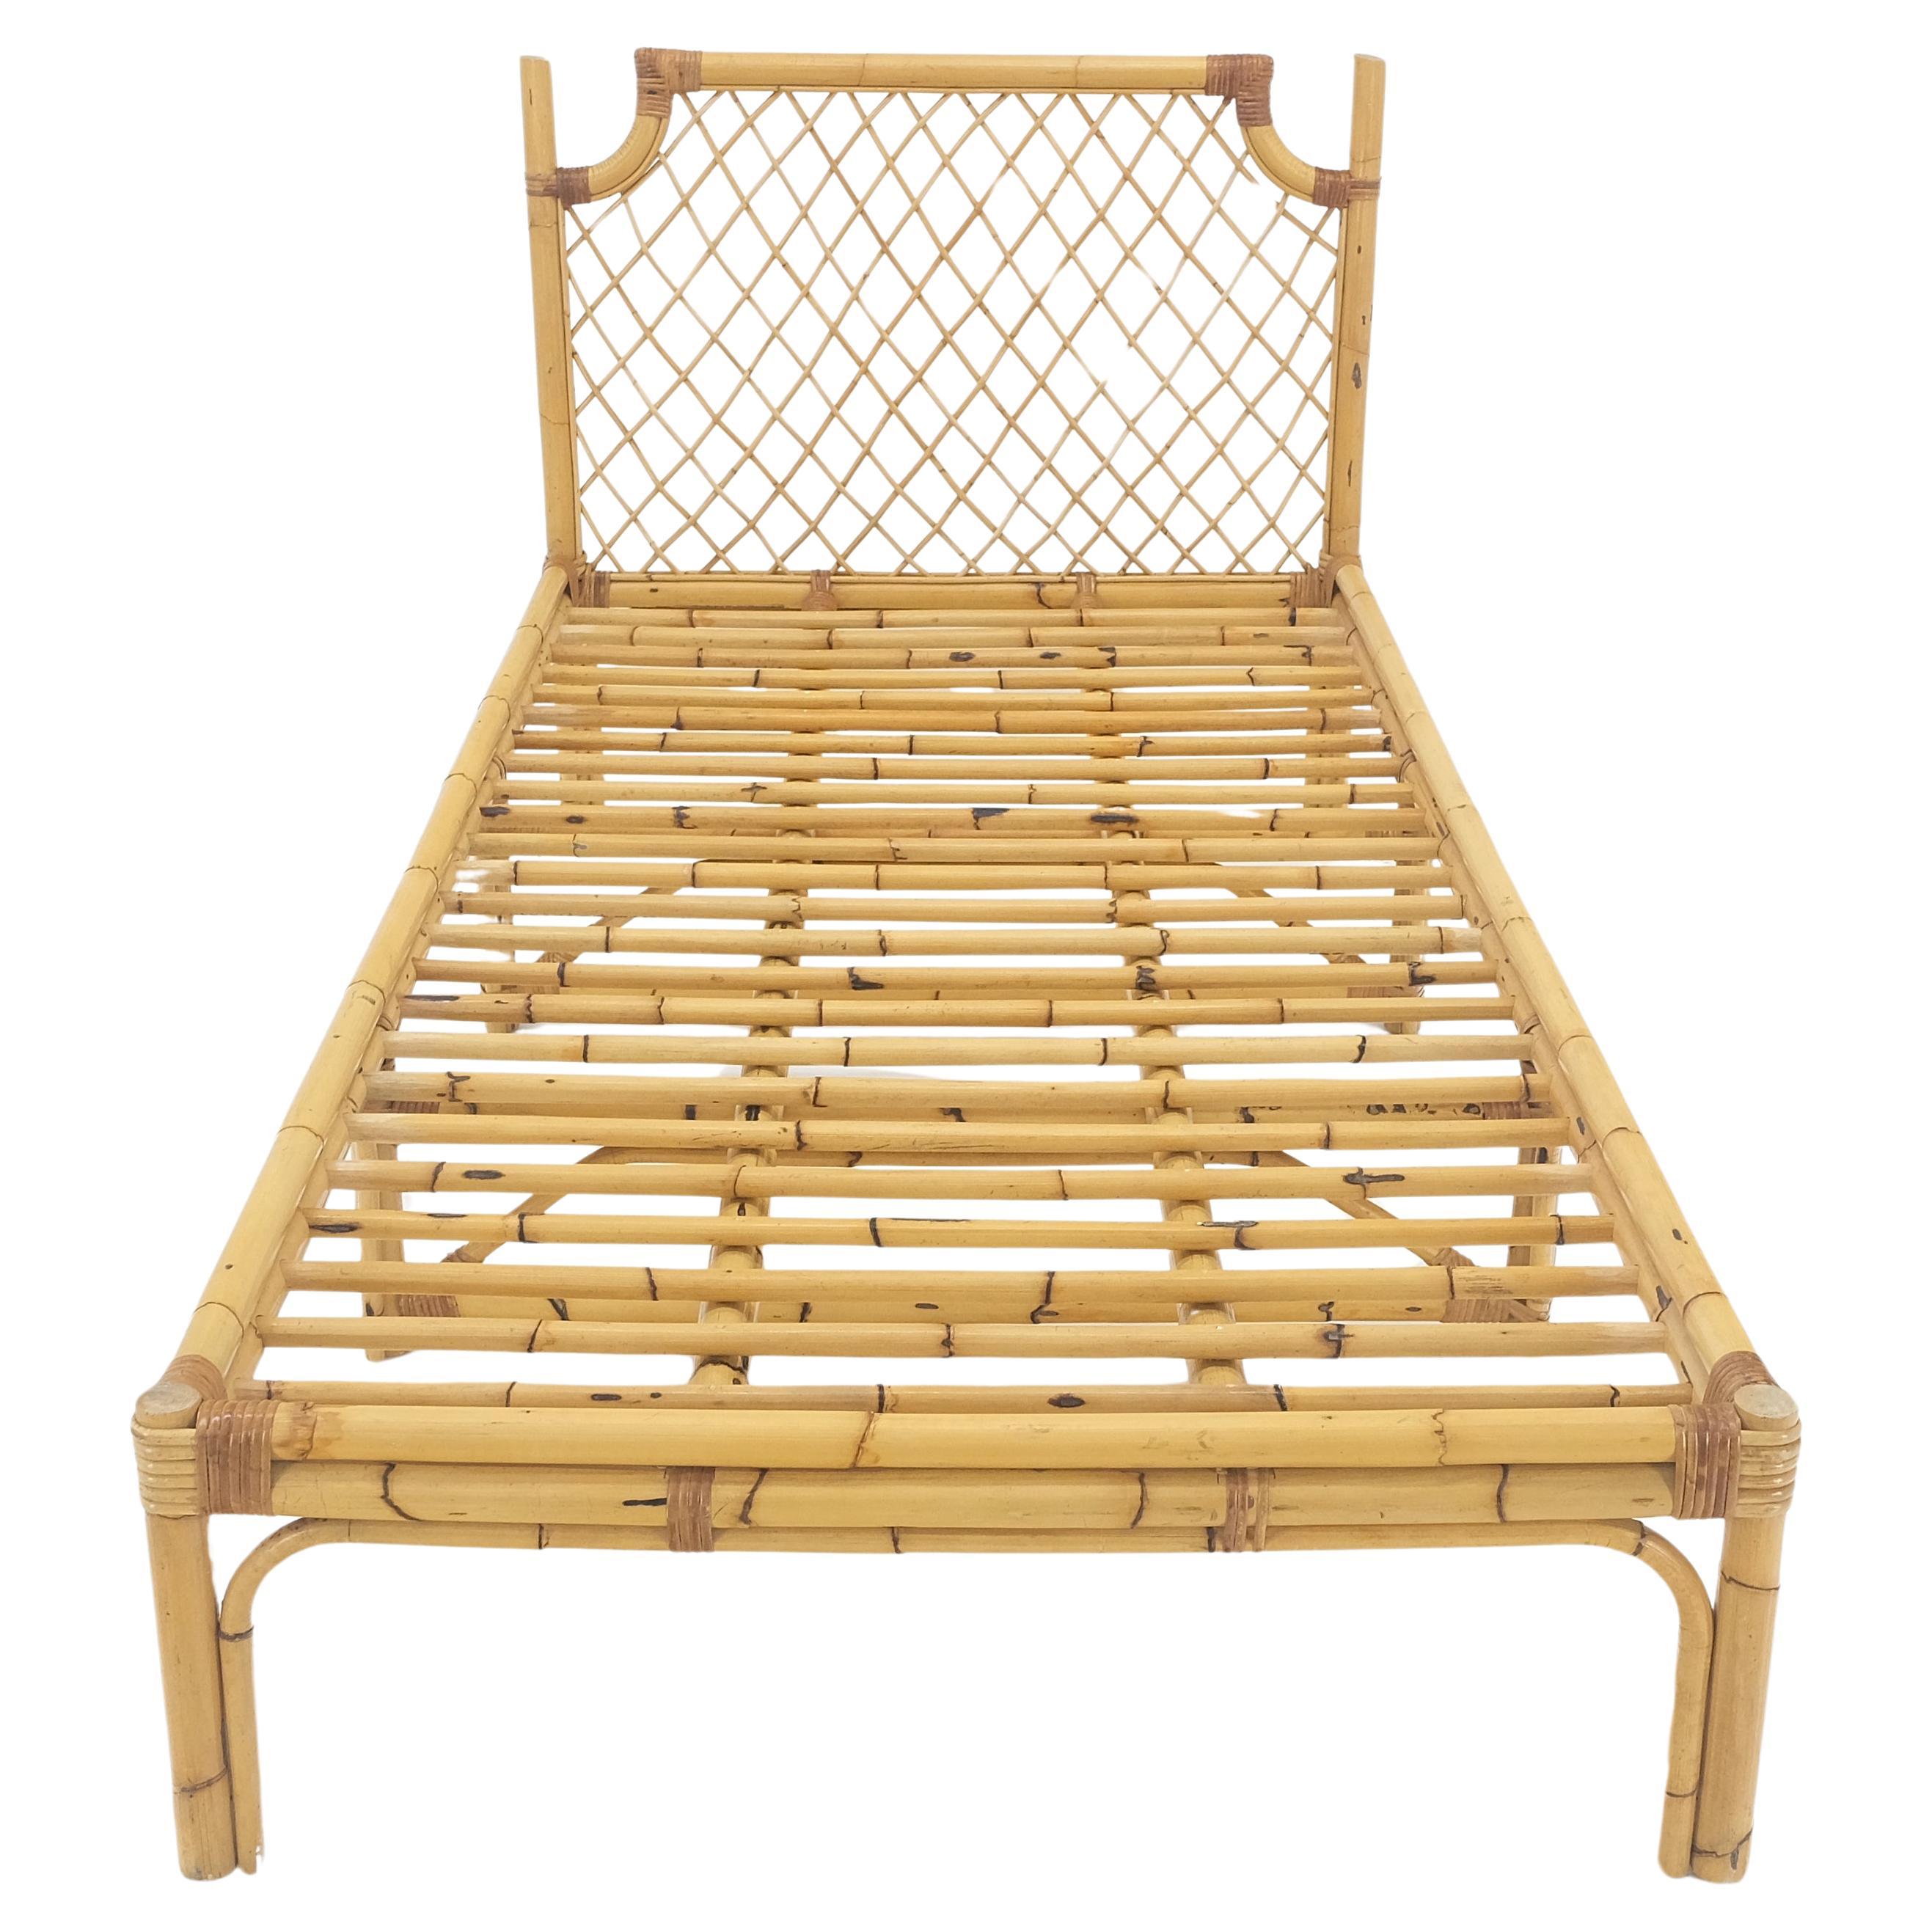 Vintage 1970s Large Bamboo Chaise Lounge Daybed Frame MINT! (Unbekannt) im Angebot